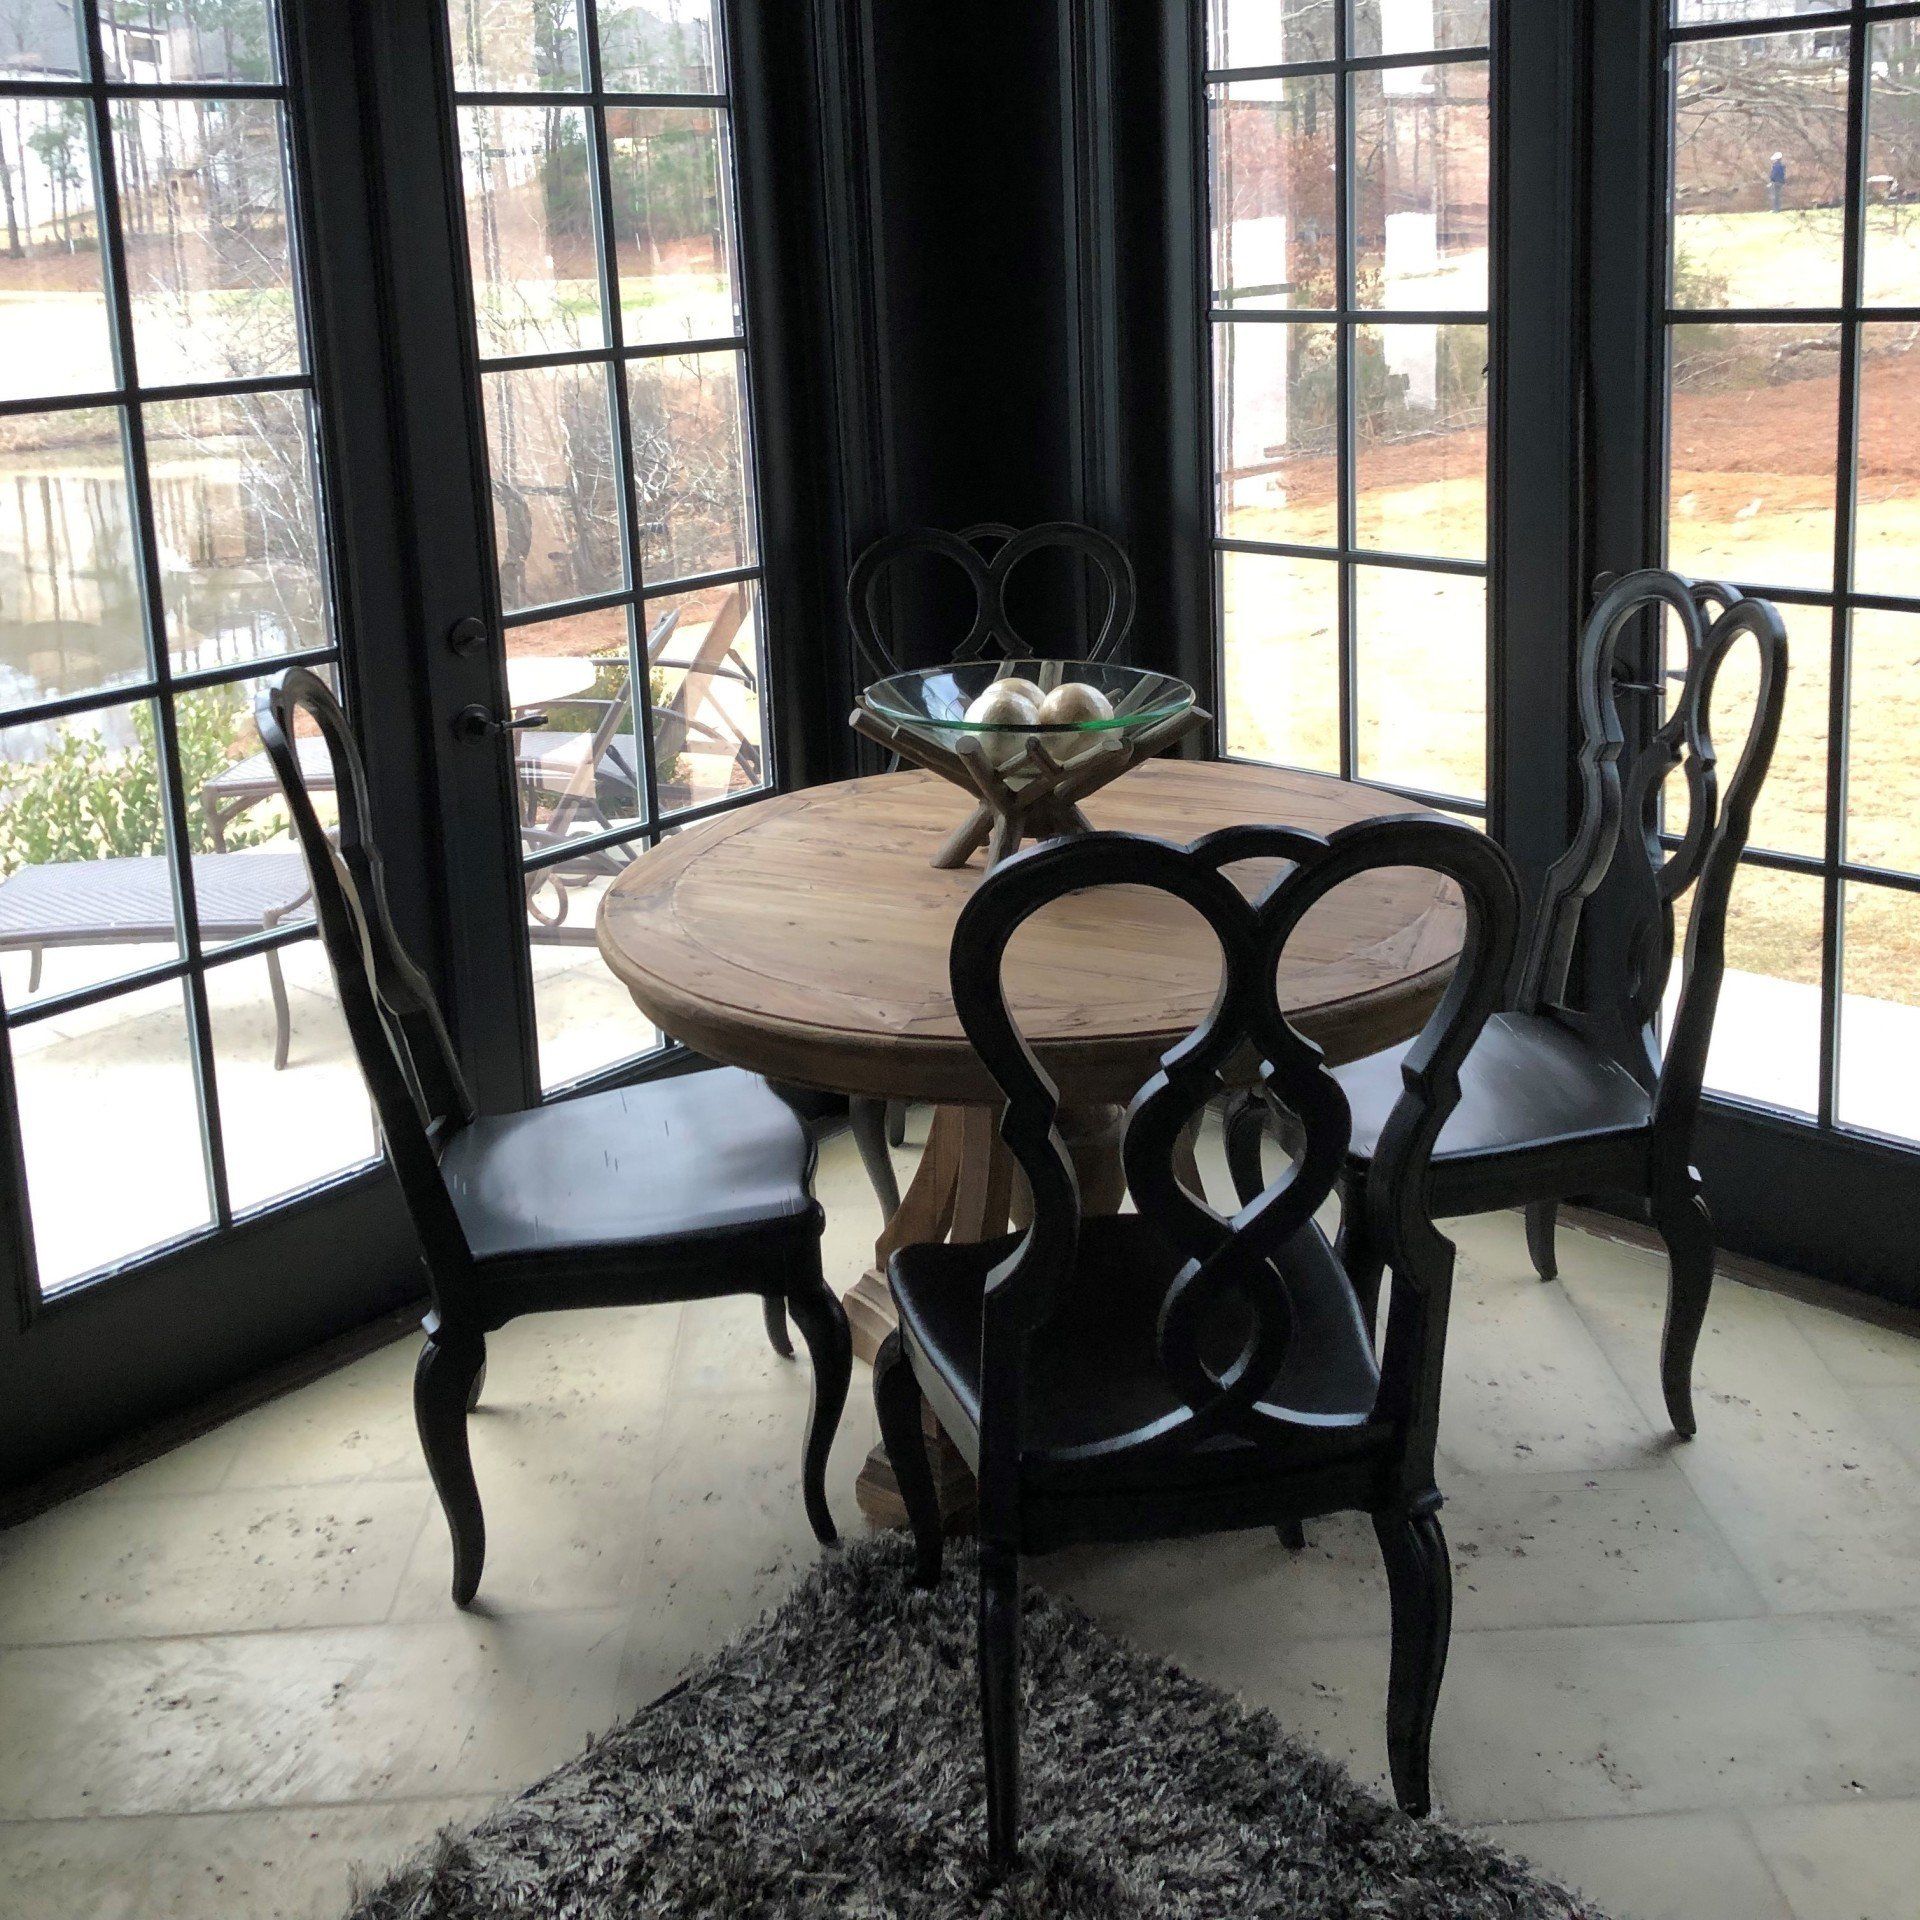 home tinting in Auburn AL - Home dining room windows now allow less than one degree temperature transfer after SPF Tint in Auburn AL